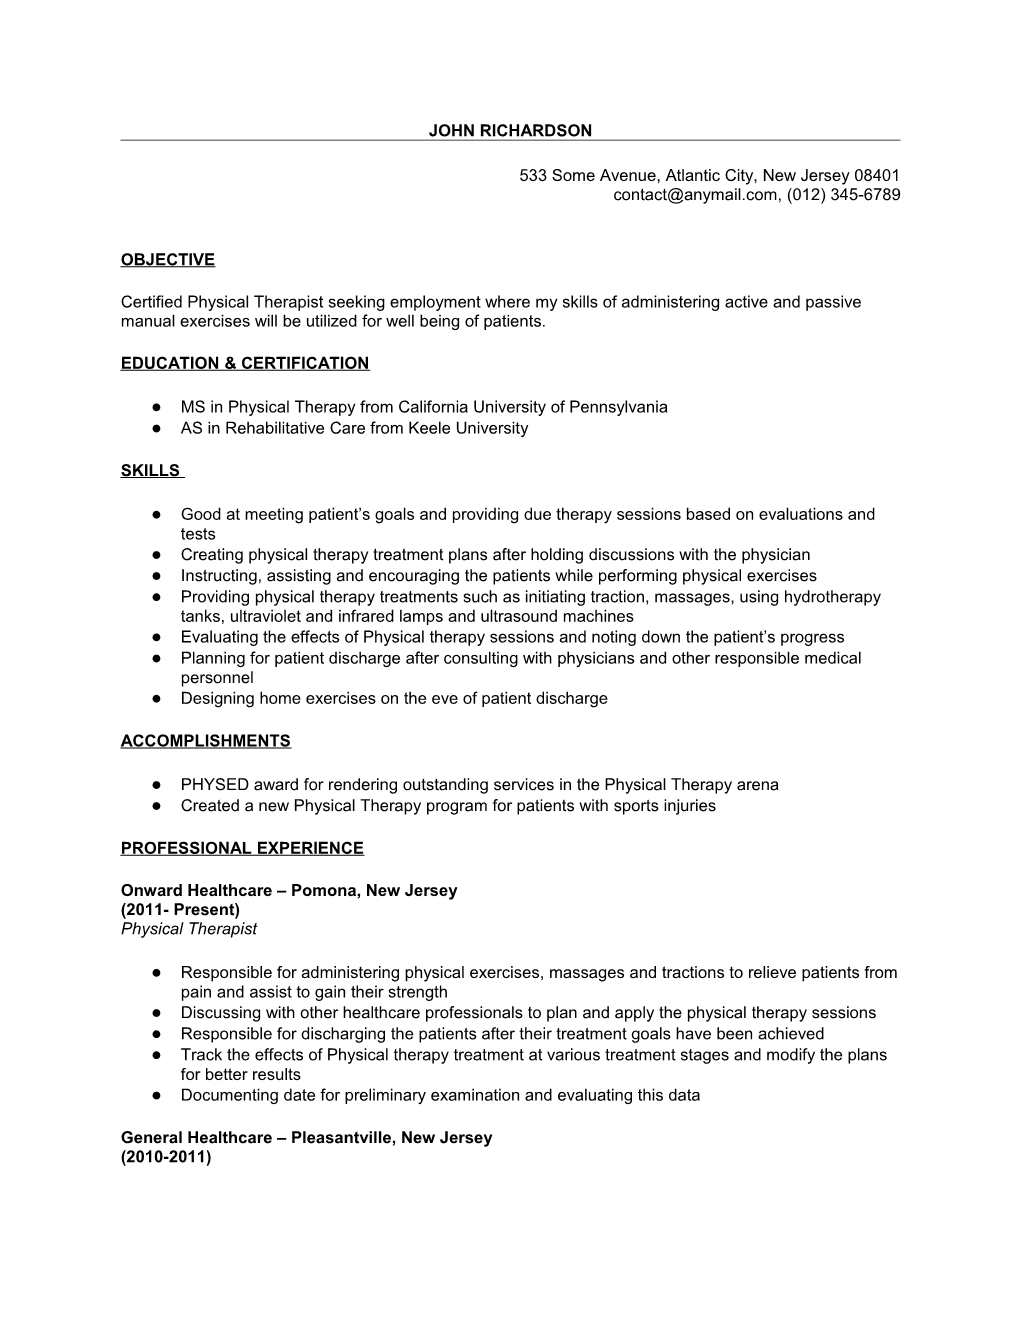 Sample Physical Therapist Resume